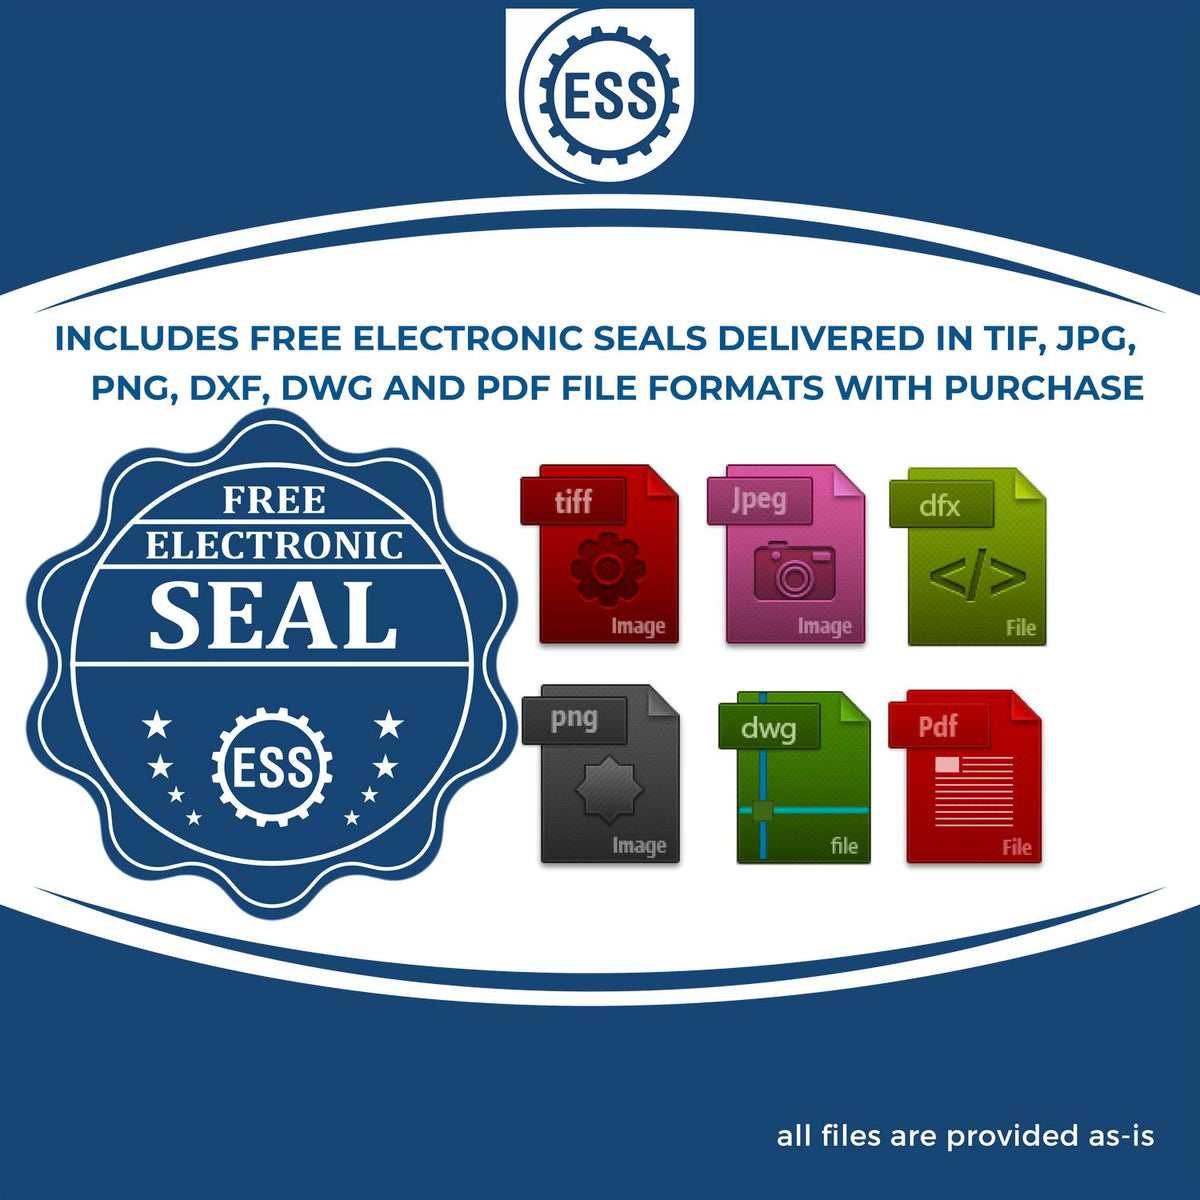 An infographic for the free electronic seal for the Gift Virginia Land Surveyor Seal illustrating the different file type icons such as DXF, DWG, TIF, JPG and PNG.